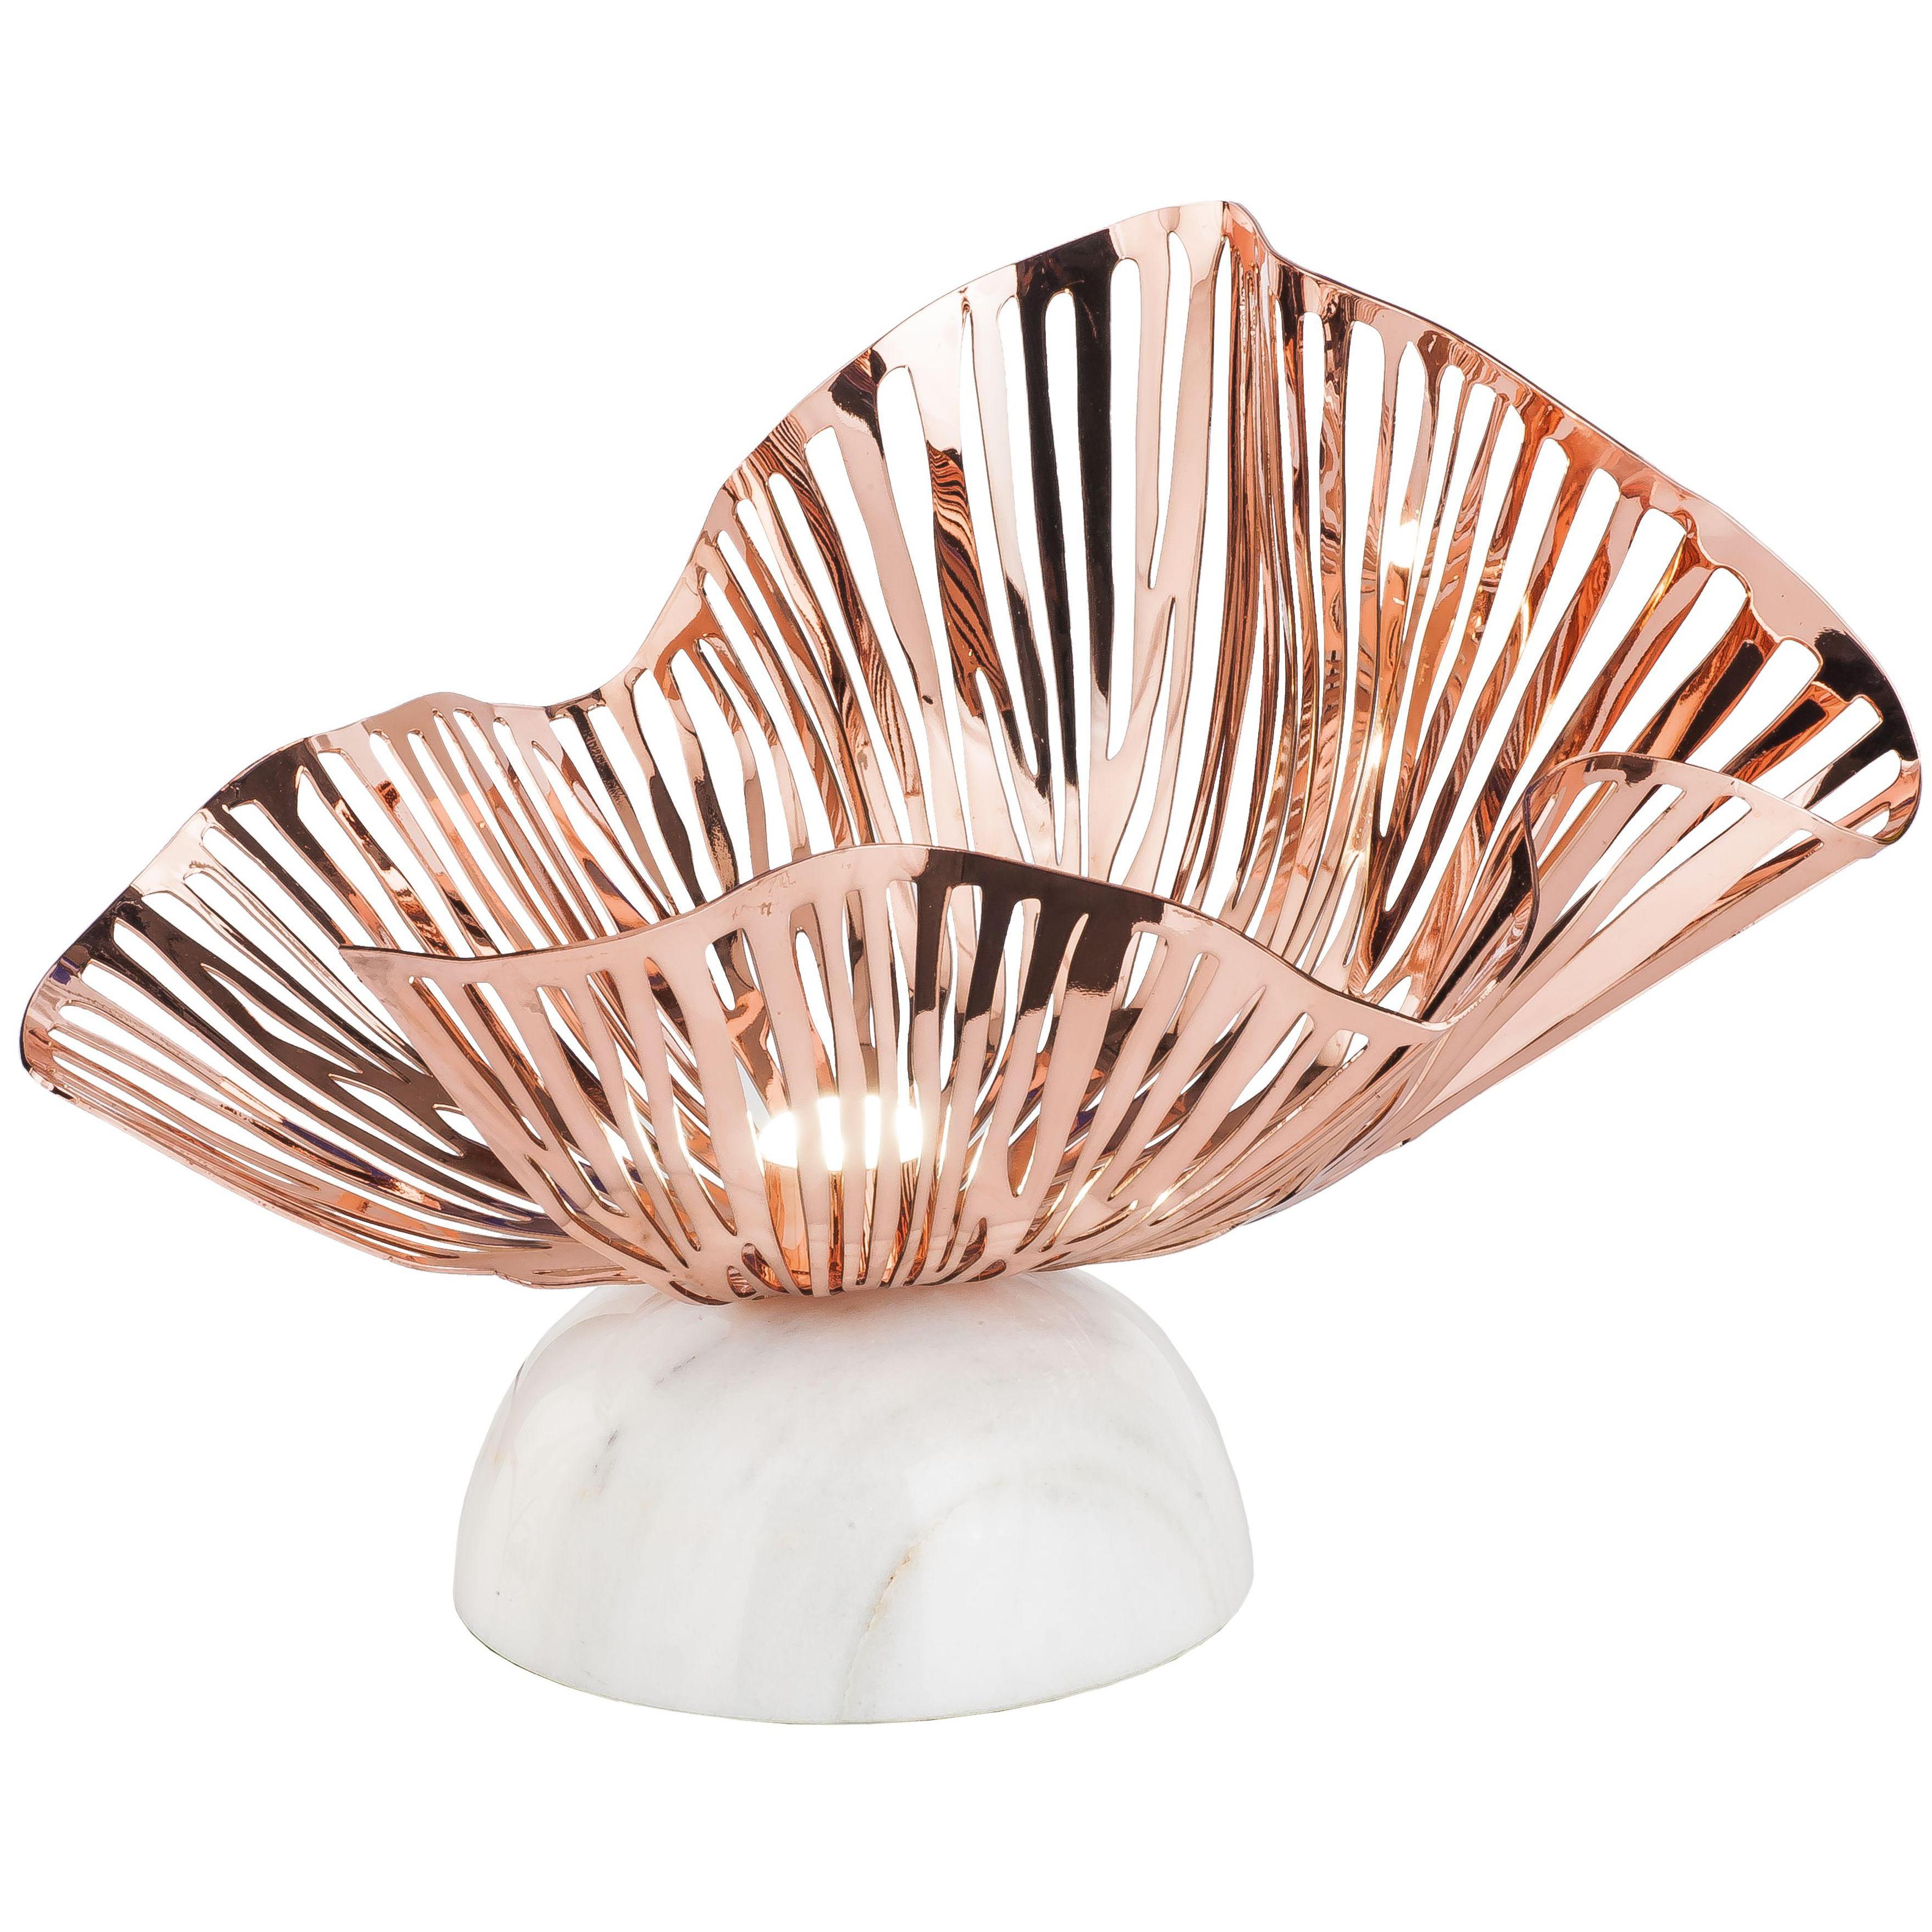 New "Lilly/T" Handmade Sculpture Table Lamp in Copper and White Marble For Sale